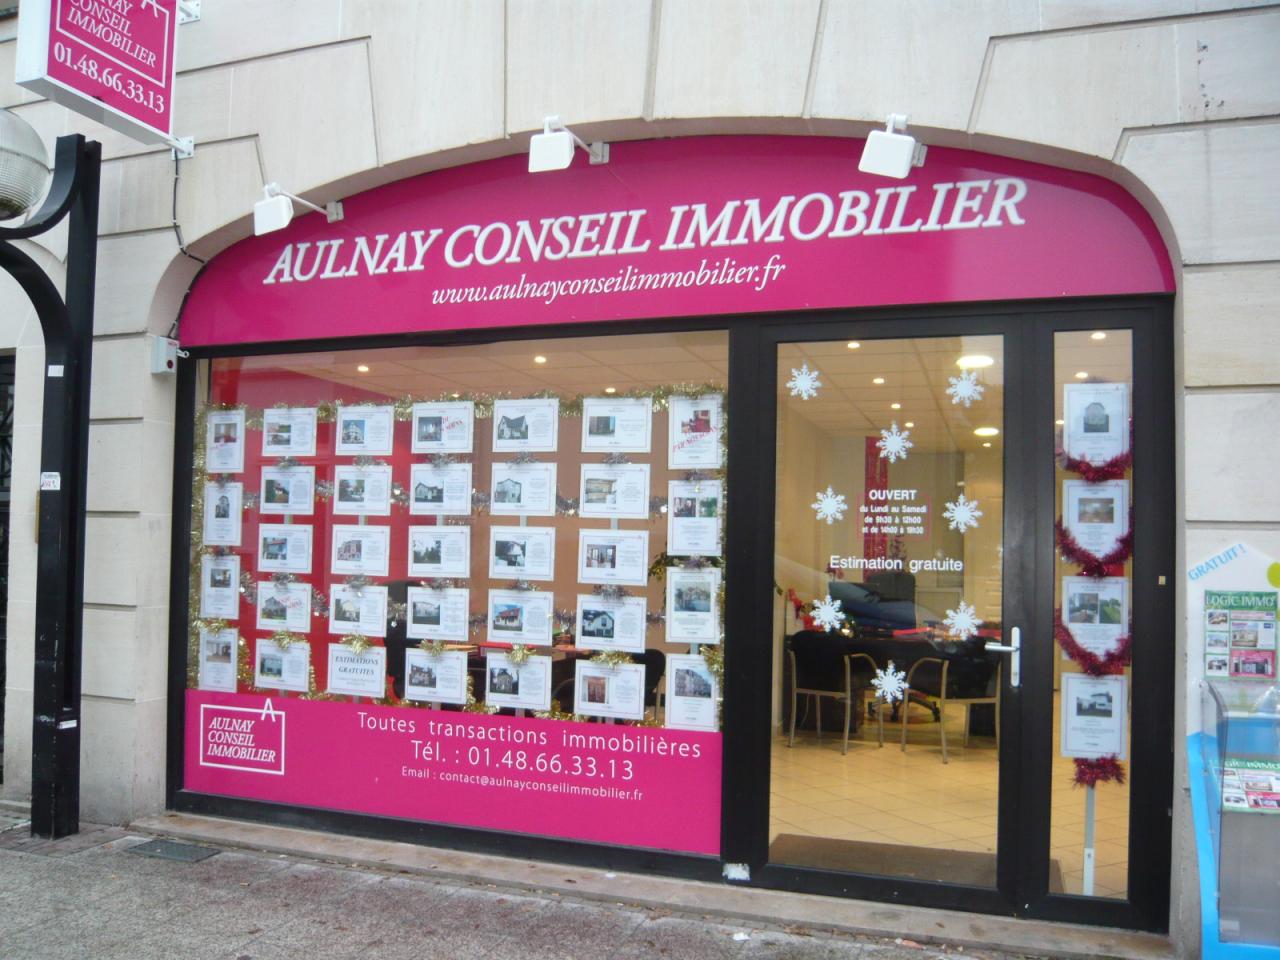 Aulnay conseil immobilier